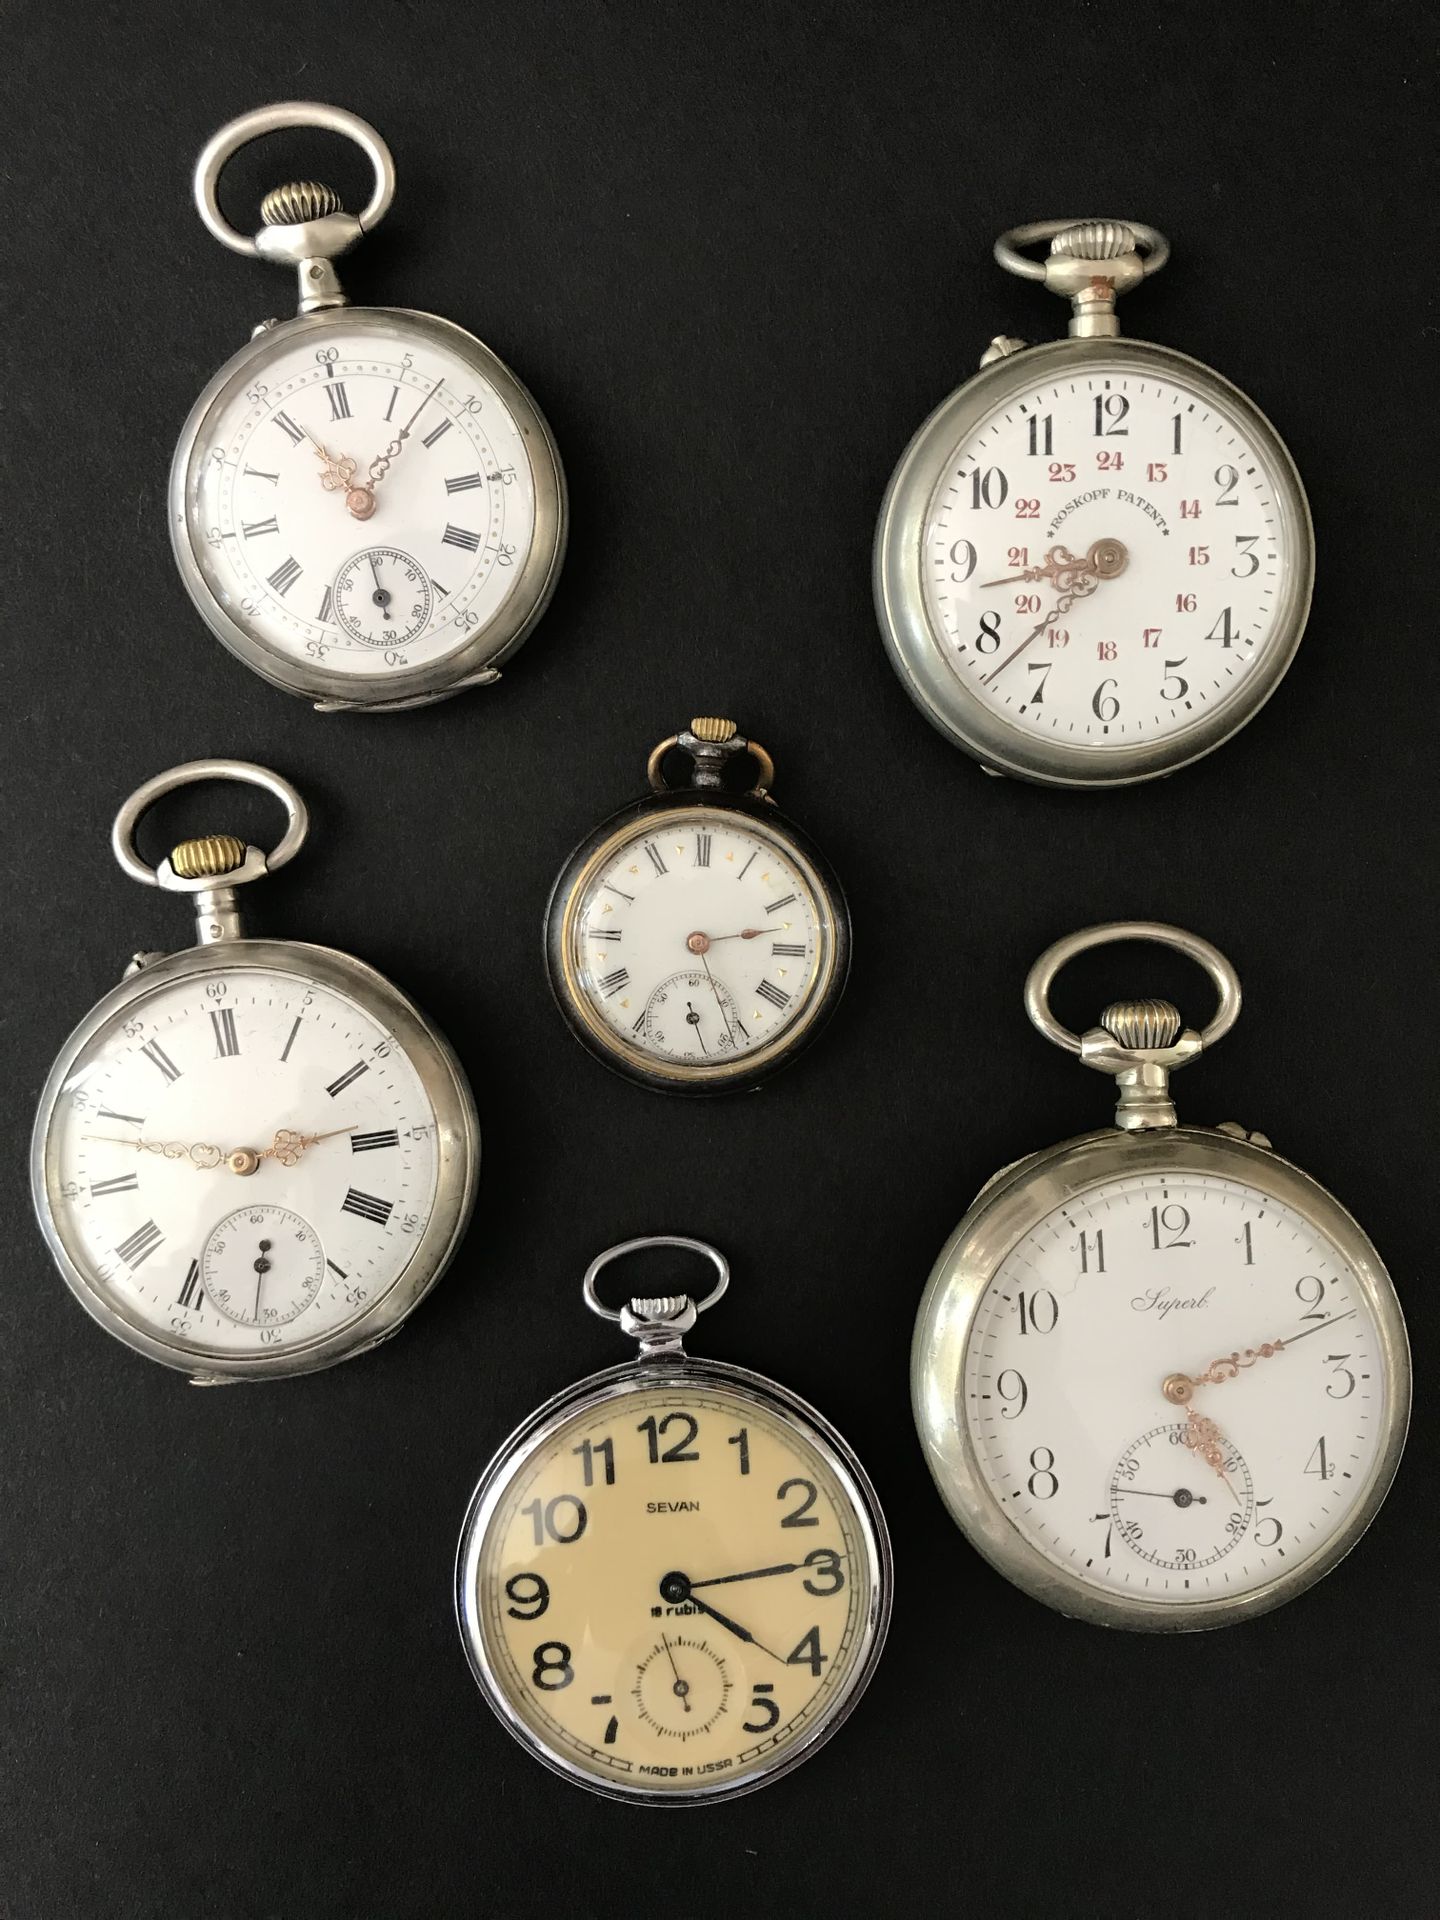 Null Lot of six GOSPET WATCHES

In working order

Some in silver